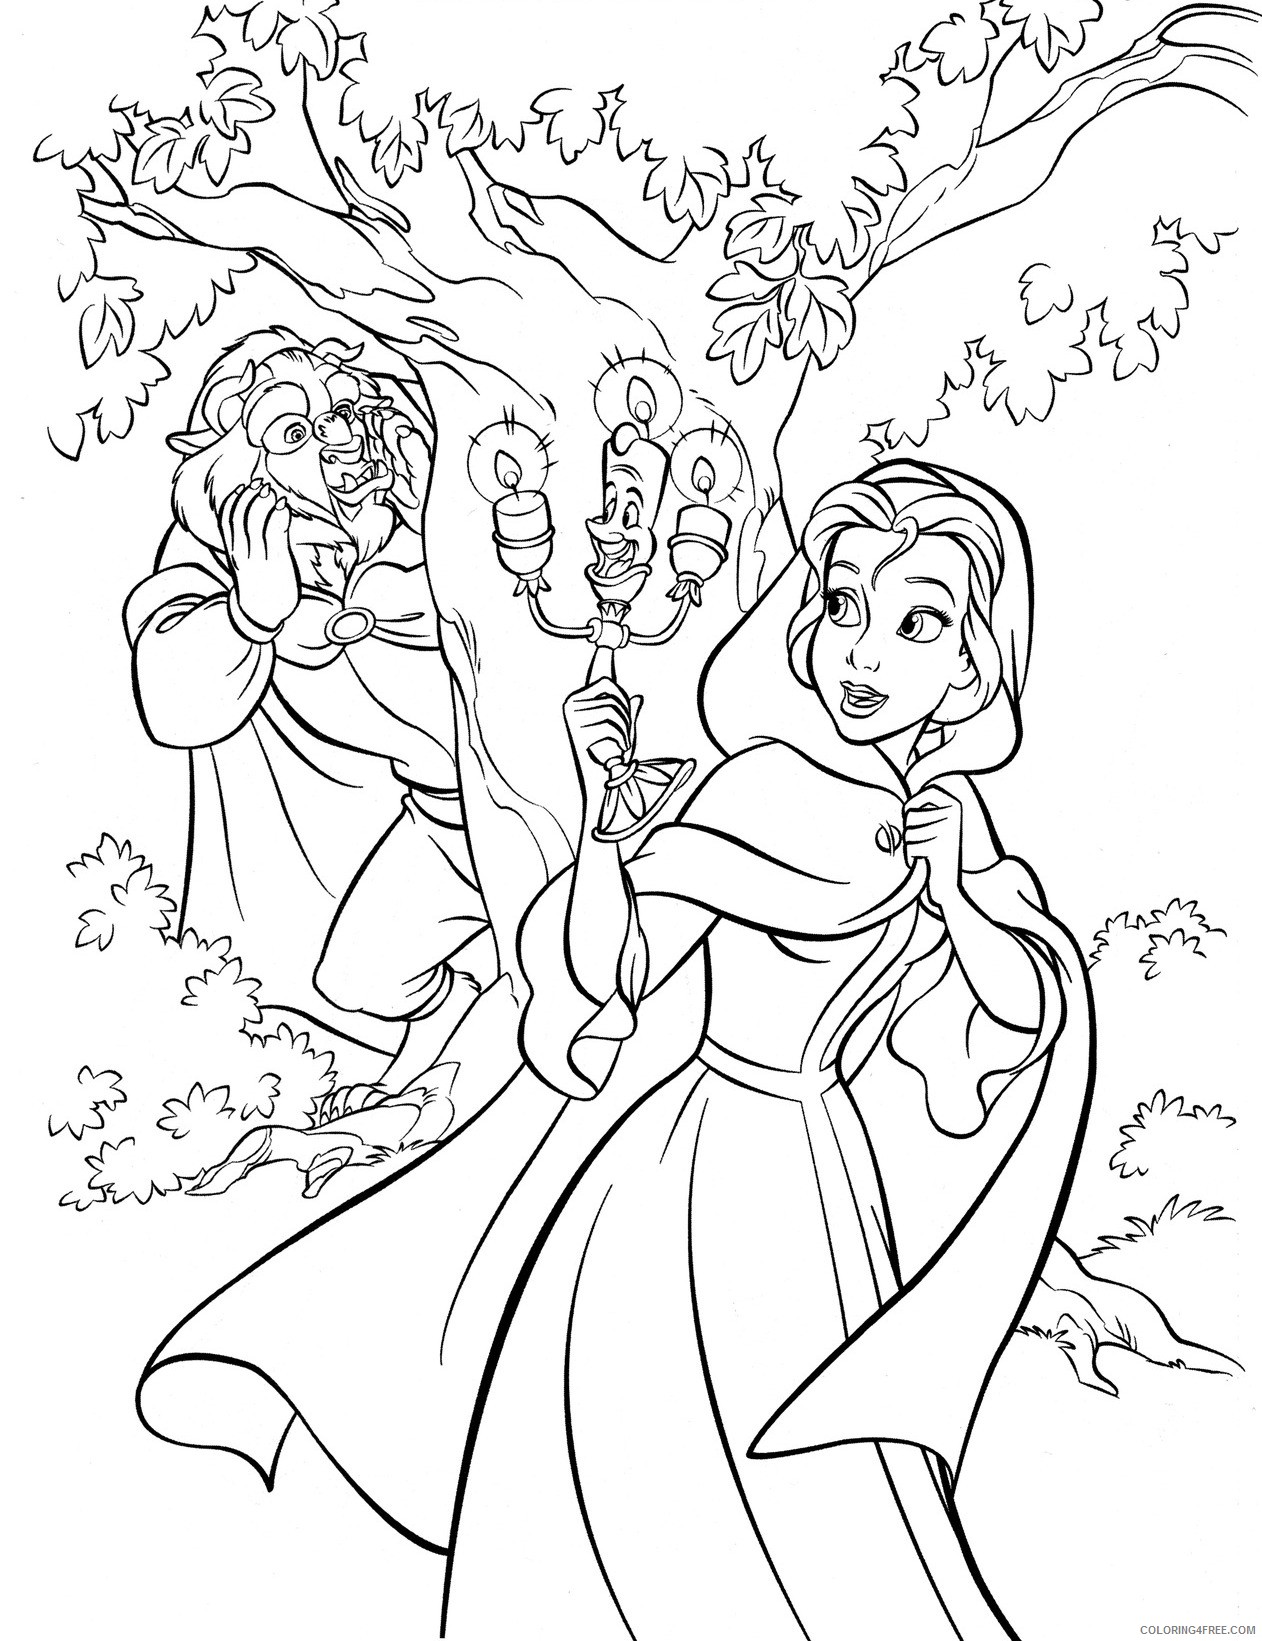 Beauty and the Beast Coloring Pages Cartoons Free Disney Beauty and the Beast Printable 2020 1173 Coloring4free